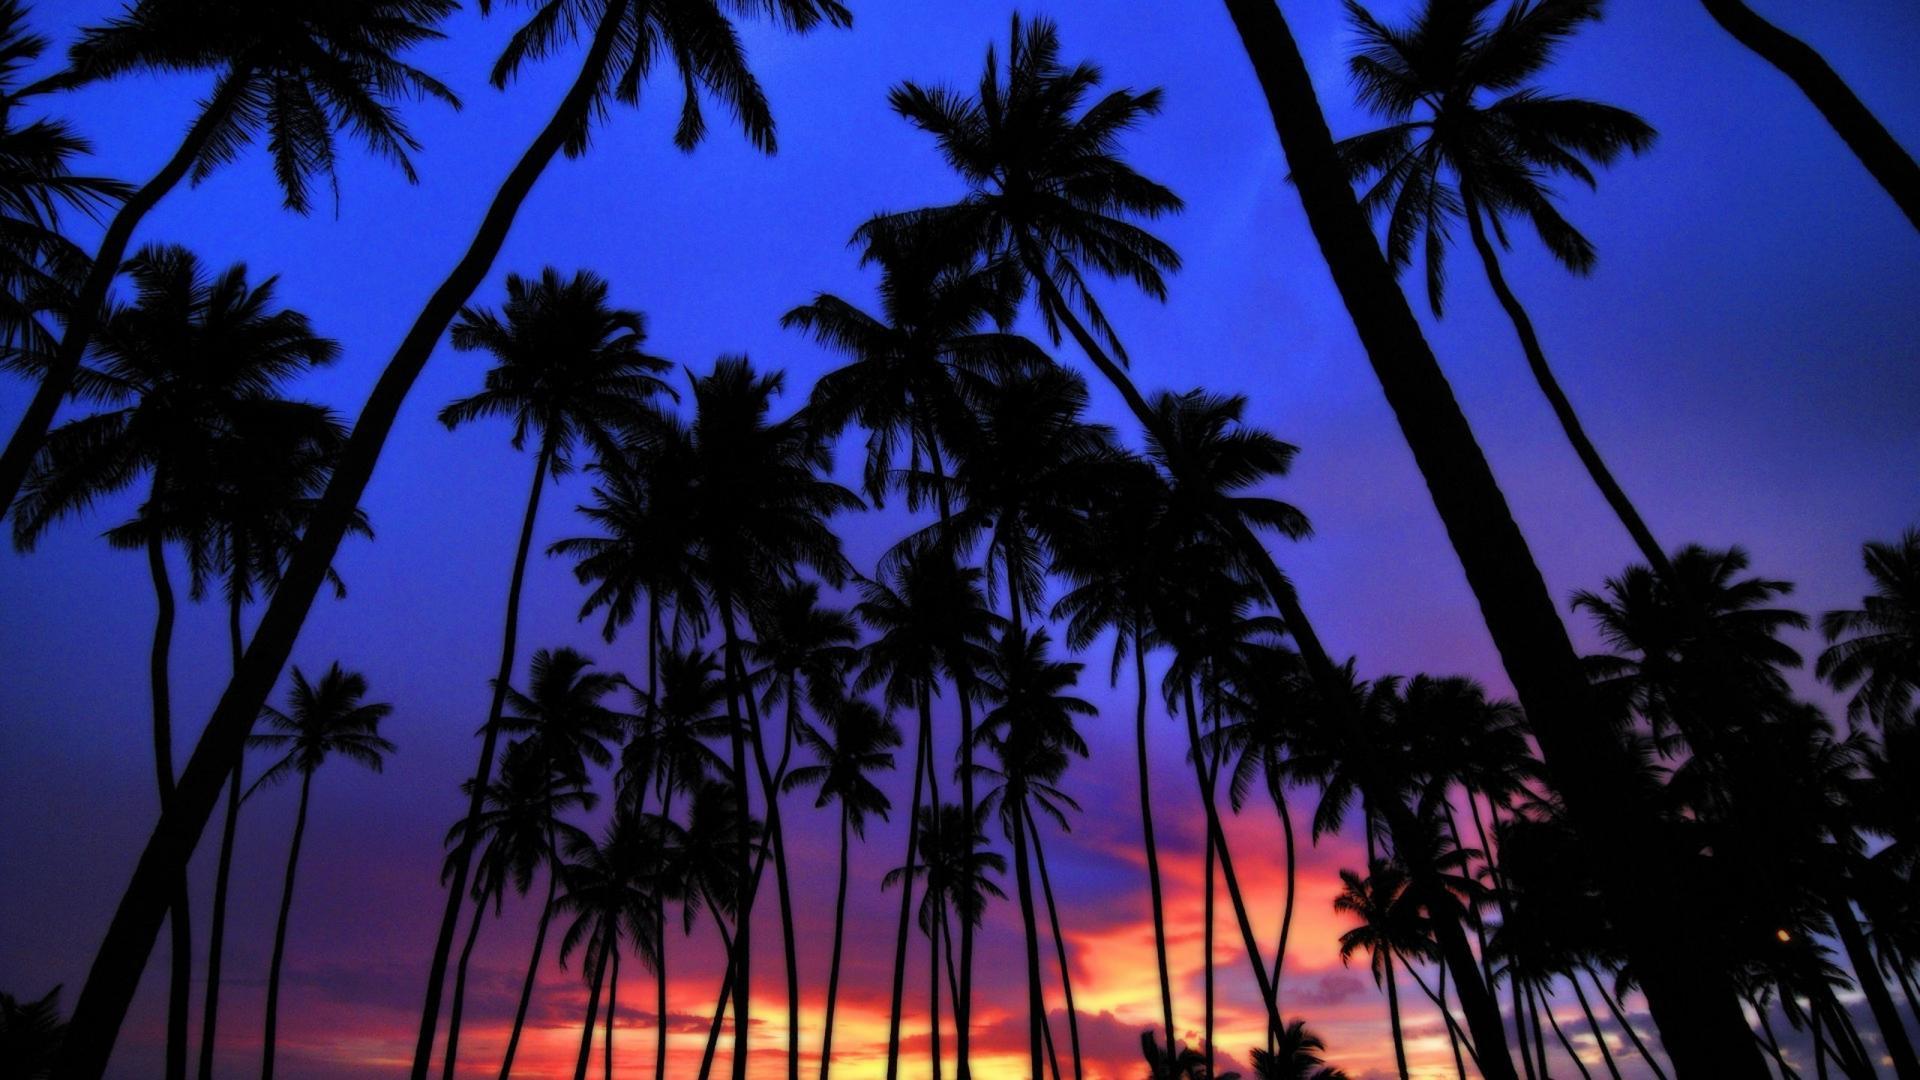 Blue Palms Wallpapers - Wallpaper Cave